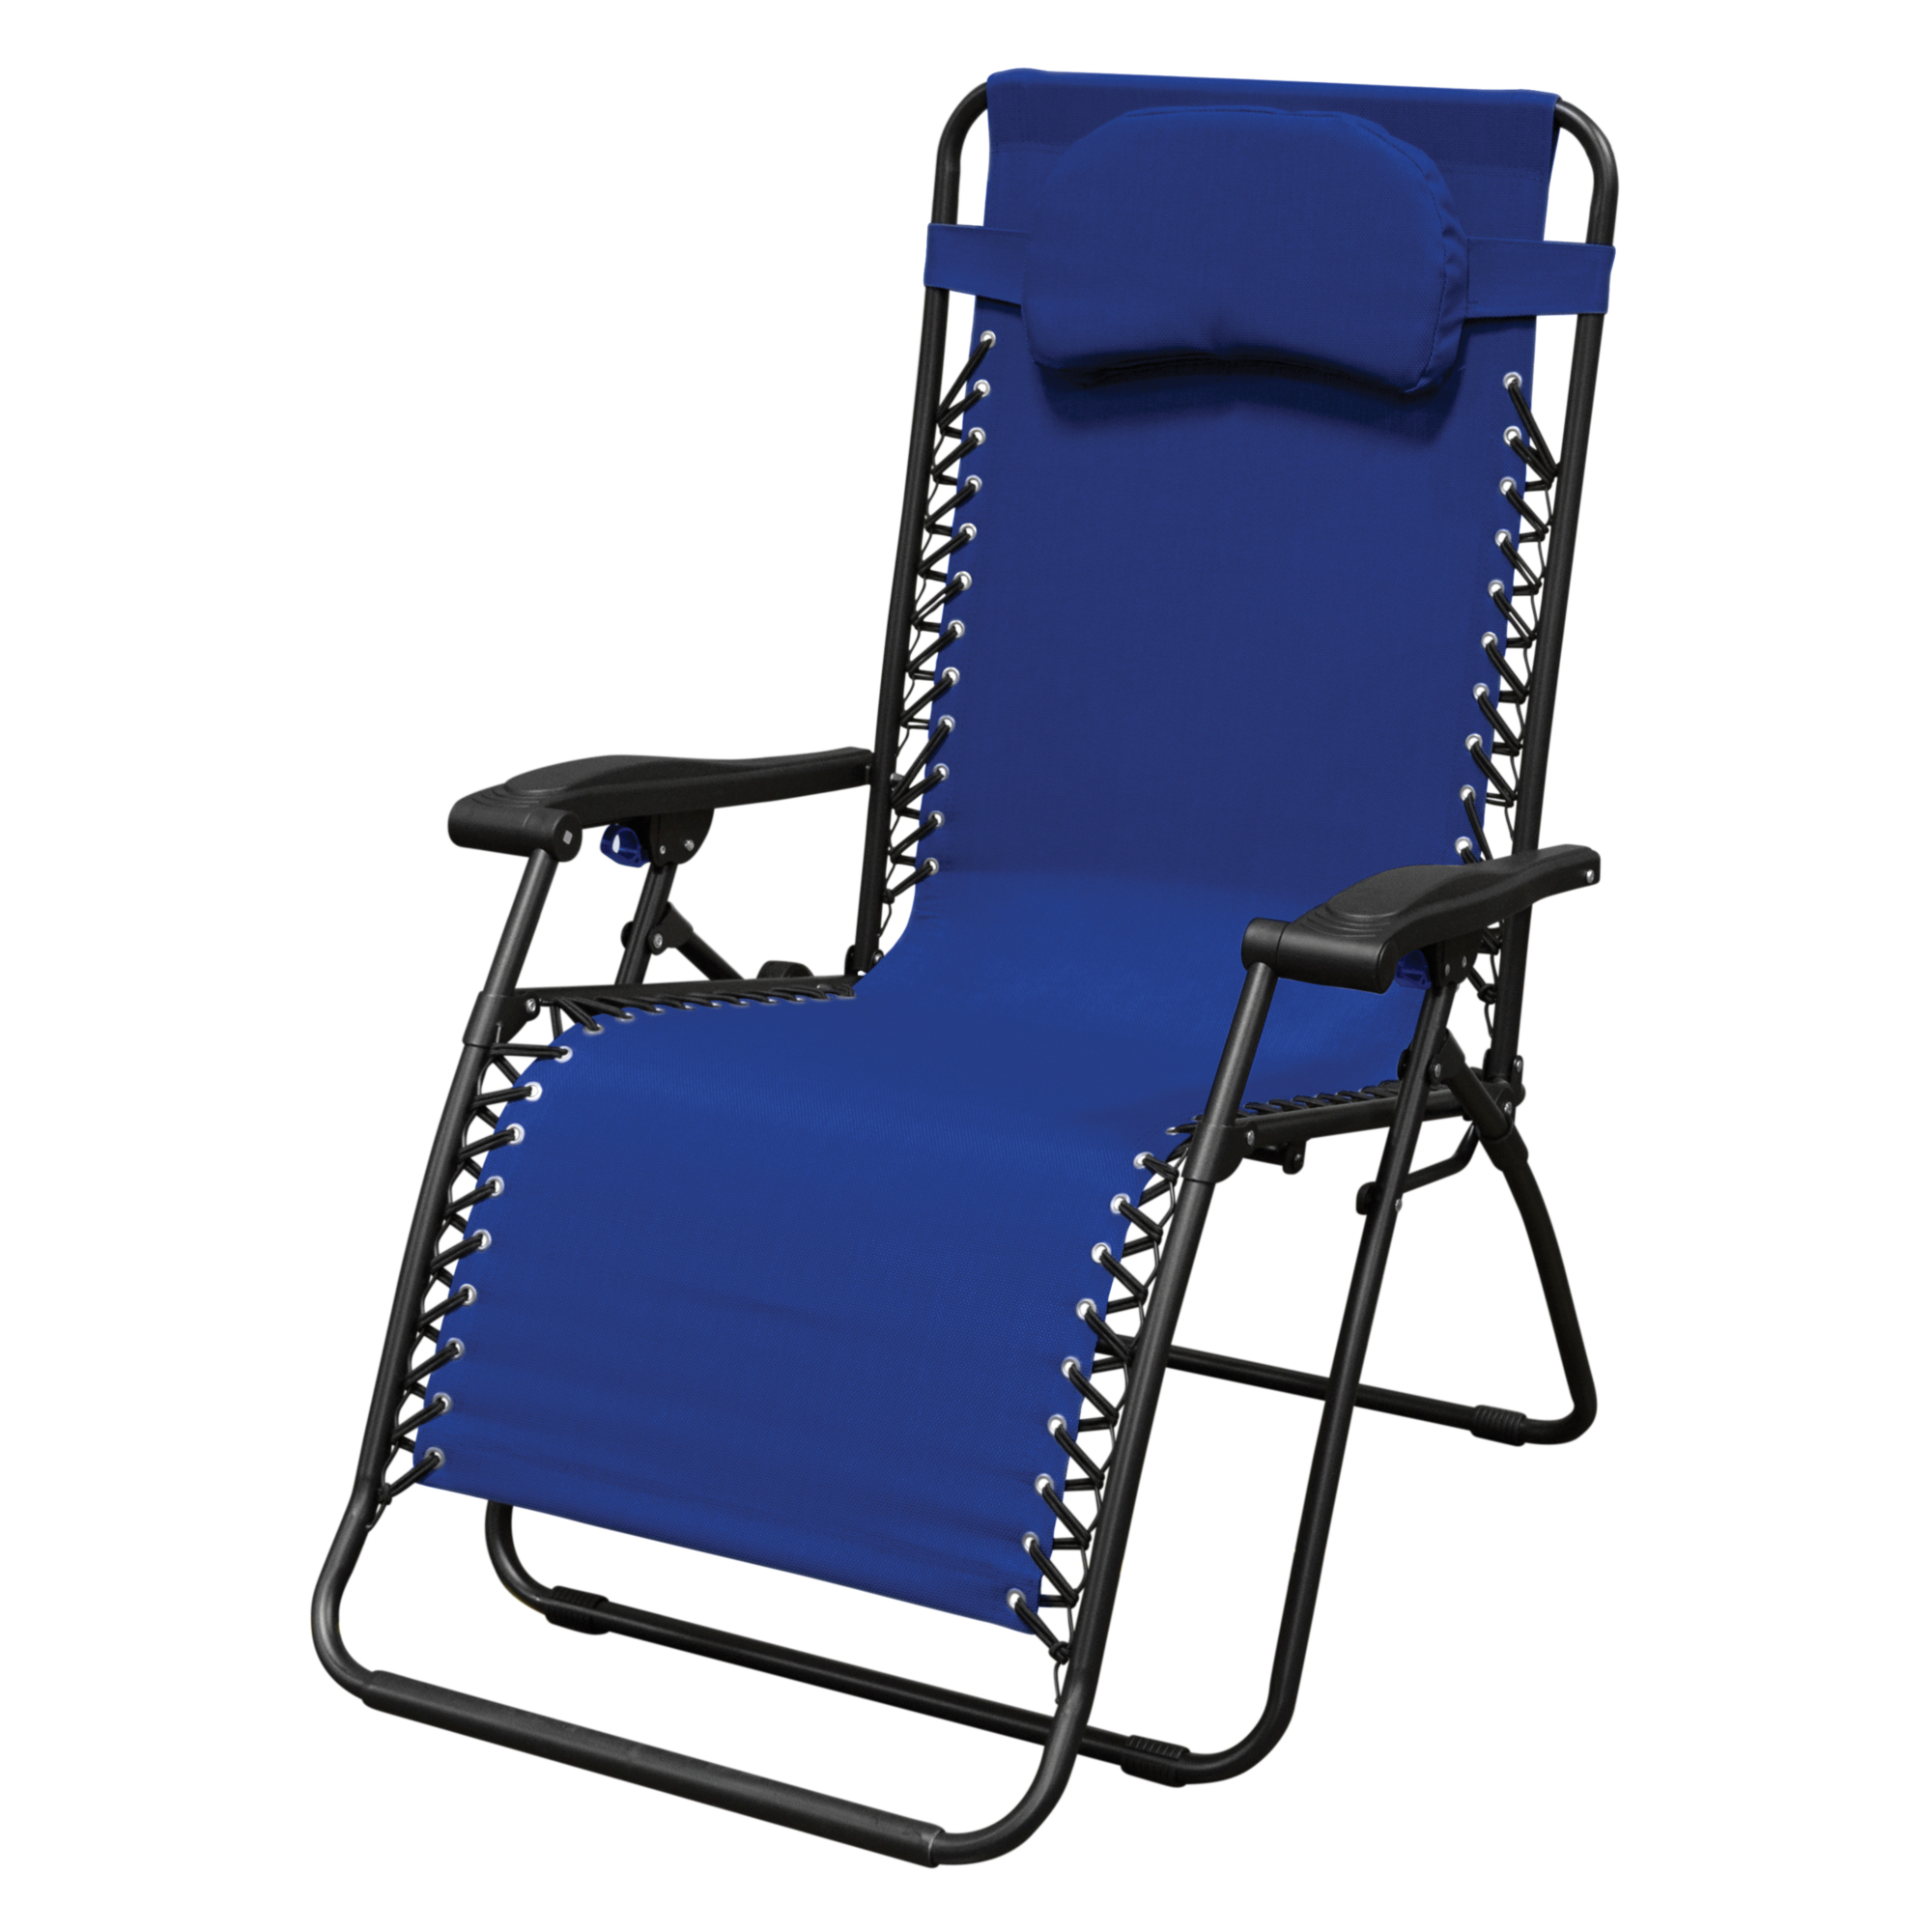 Caravan Canopy, Infinity Oversized Gravity Chair, Primary Color Blue, Material Textile, Width 27.16 in, Model 80009000021